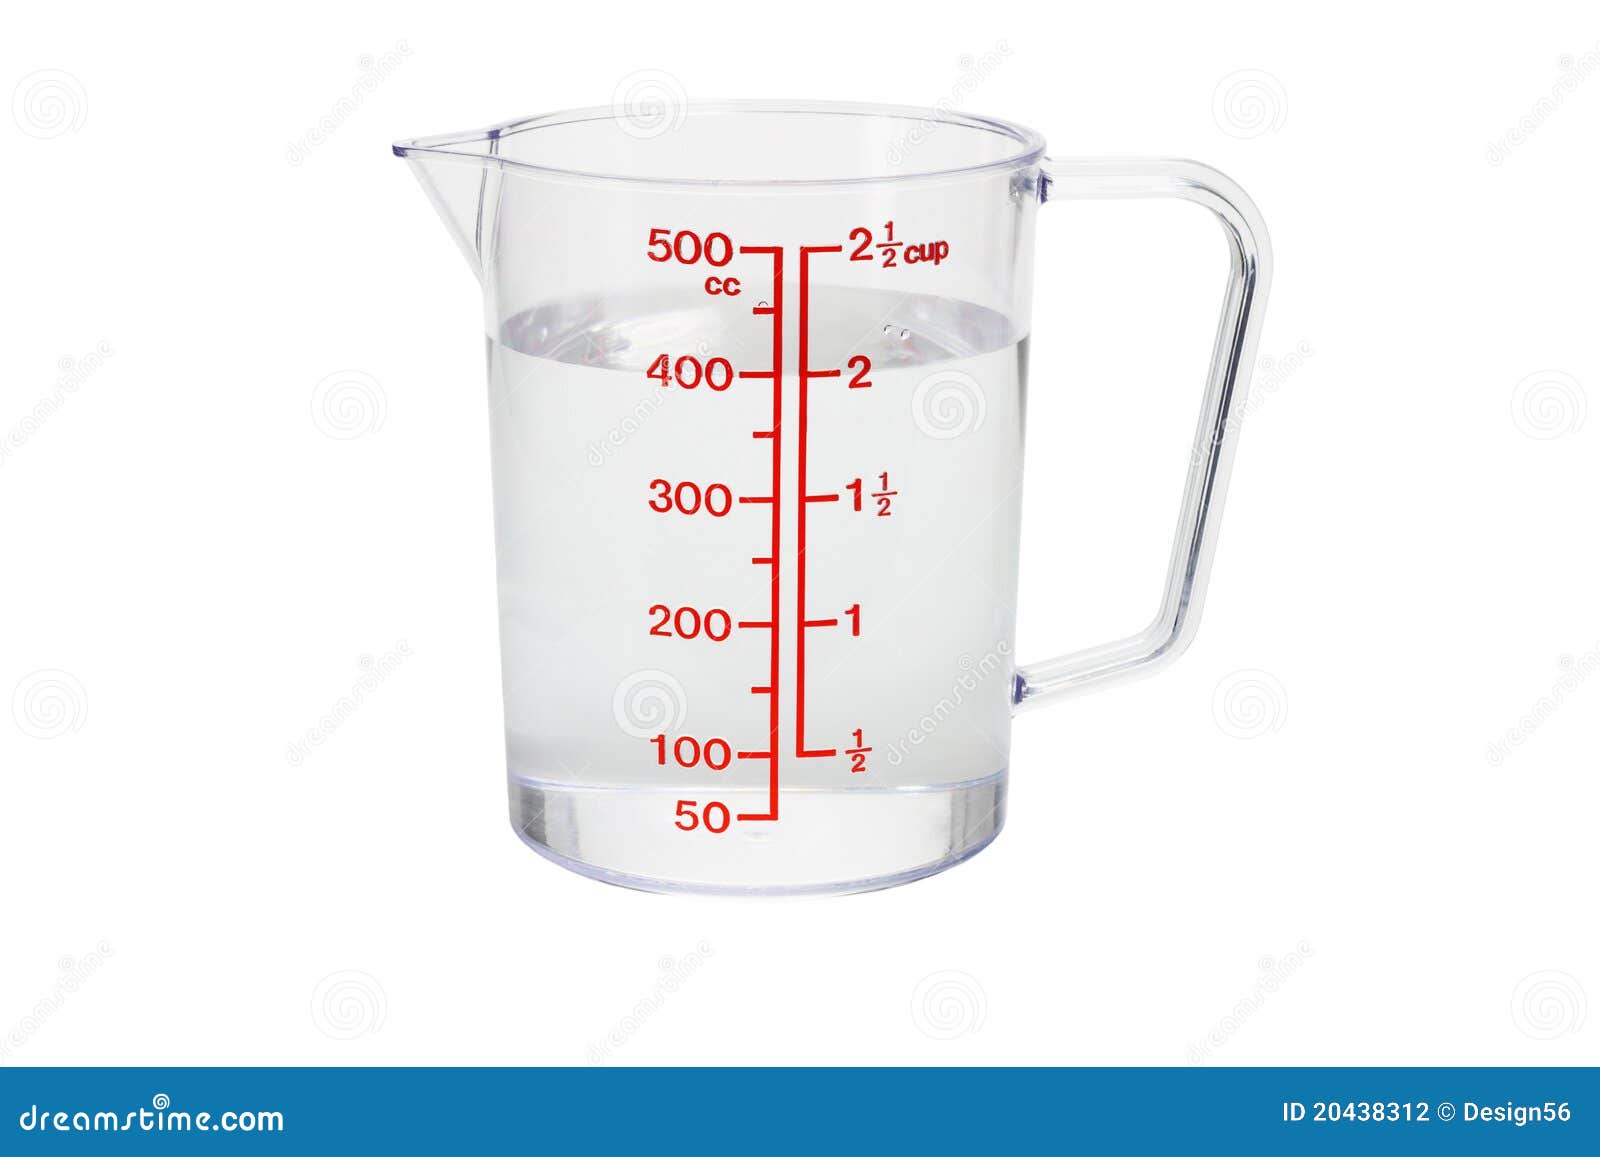 plastic kitchen measuring cup filled with water